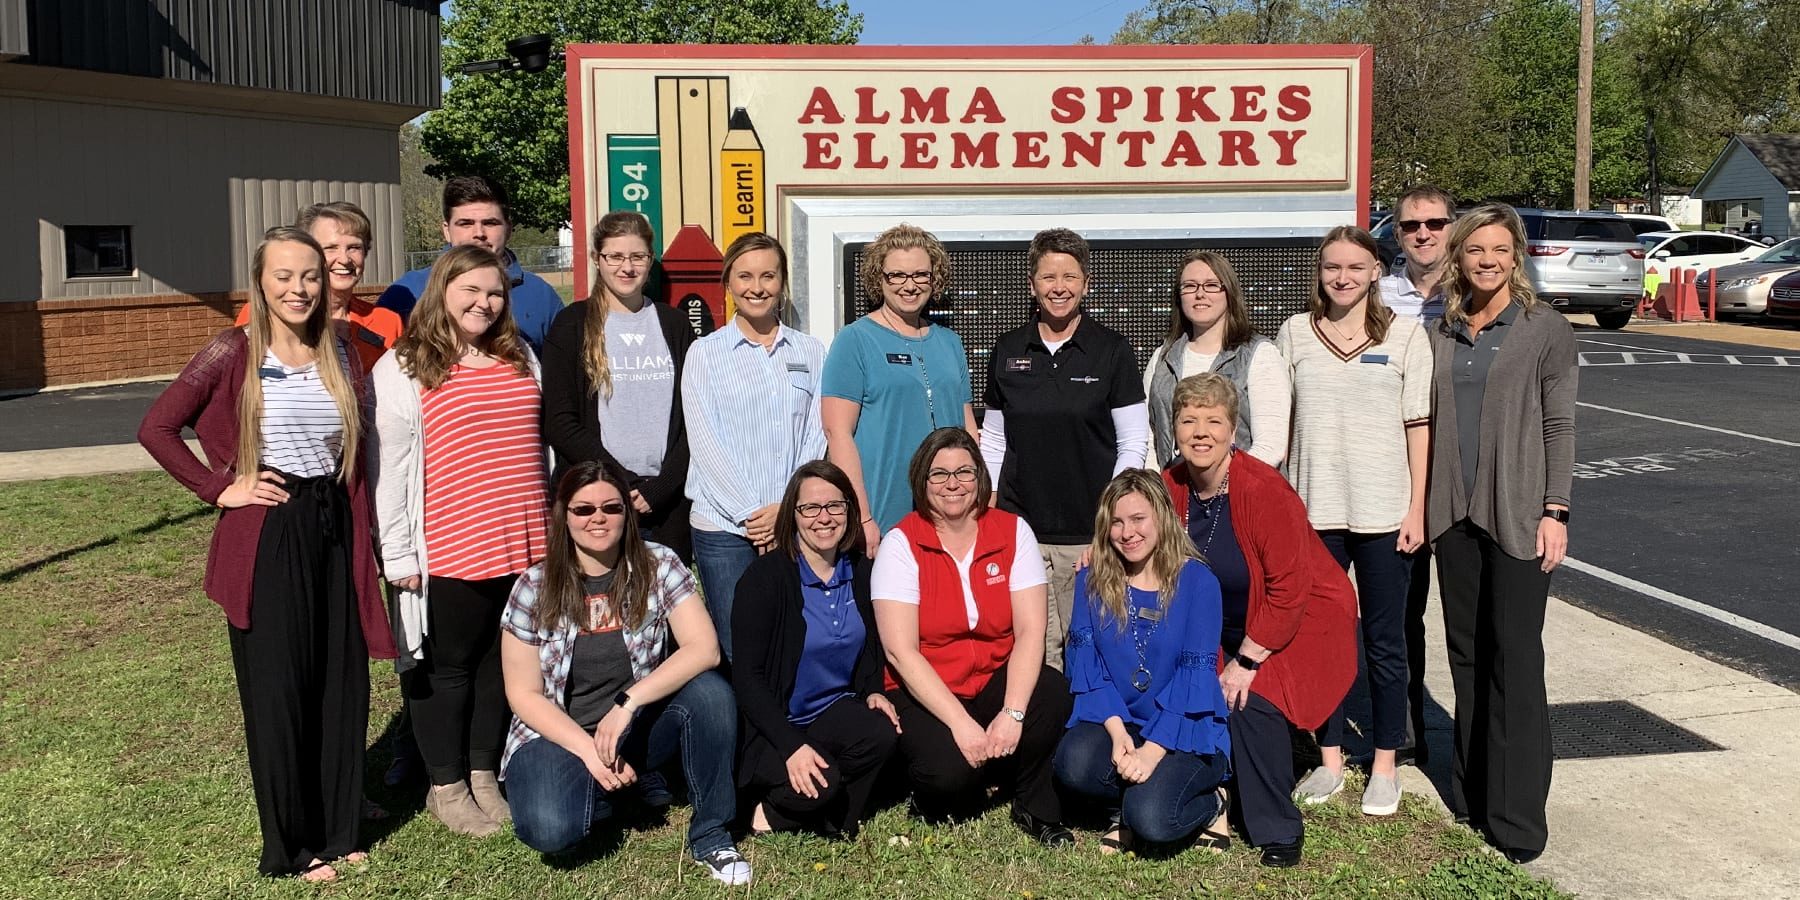 A group of people pose in front of Alma Spikes Elementary School.